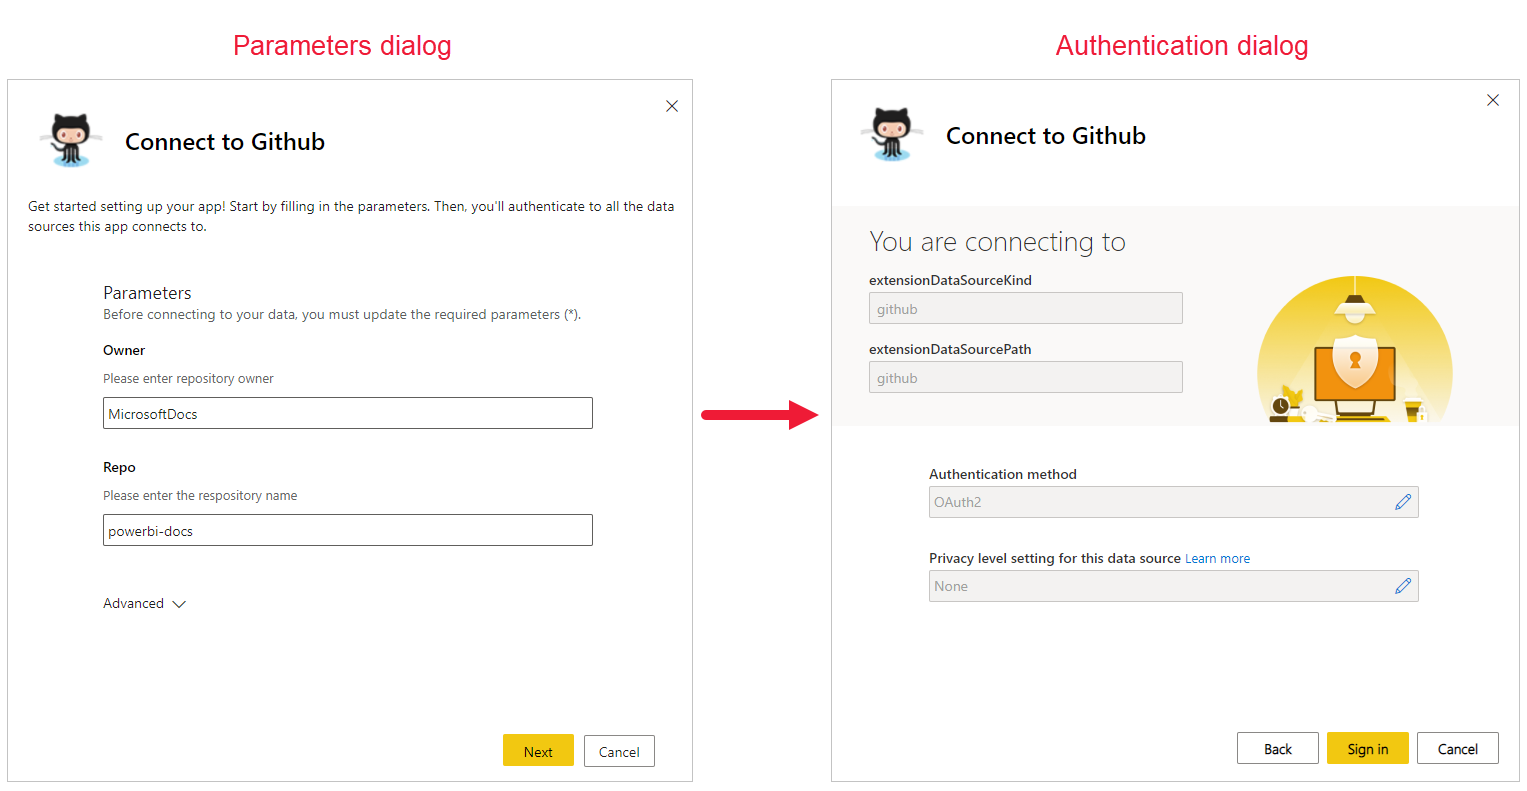 Screenshot showing the parameters and authentication dialogs for connecting your own data source.